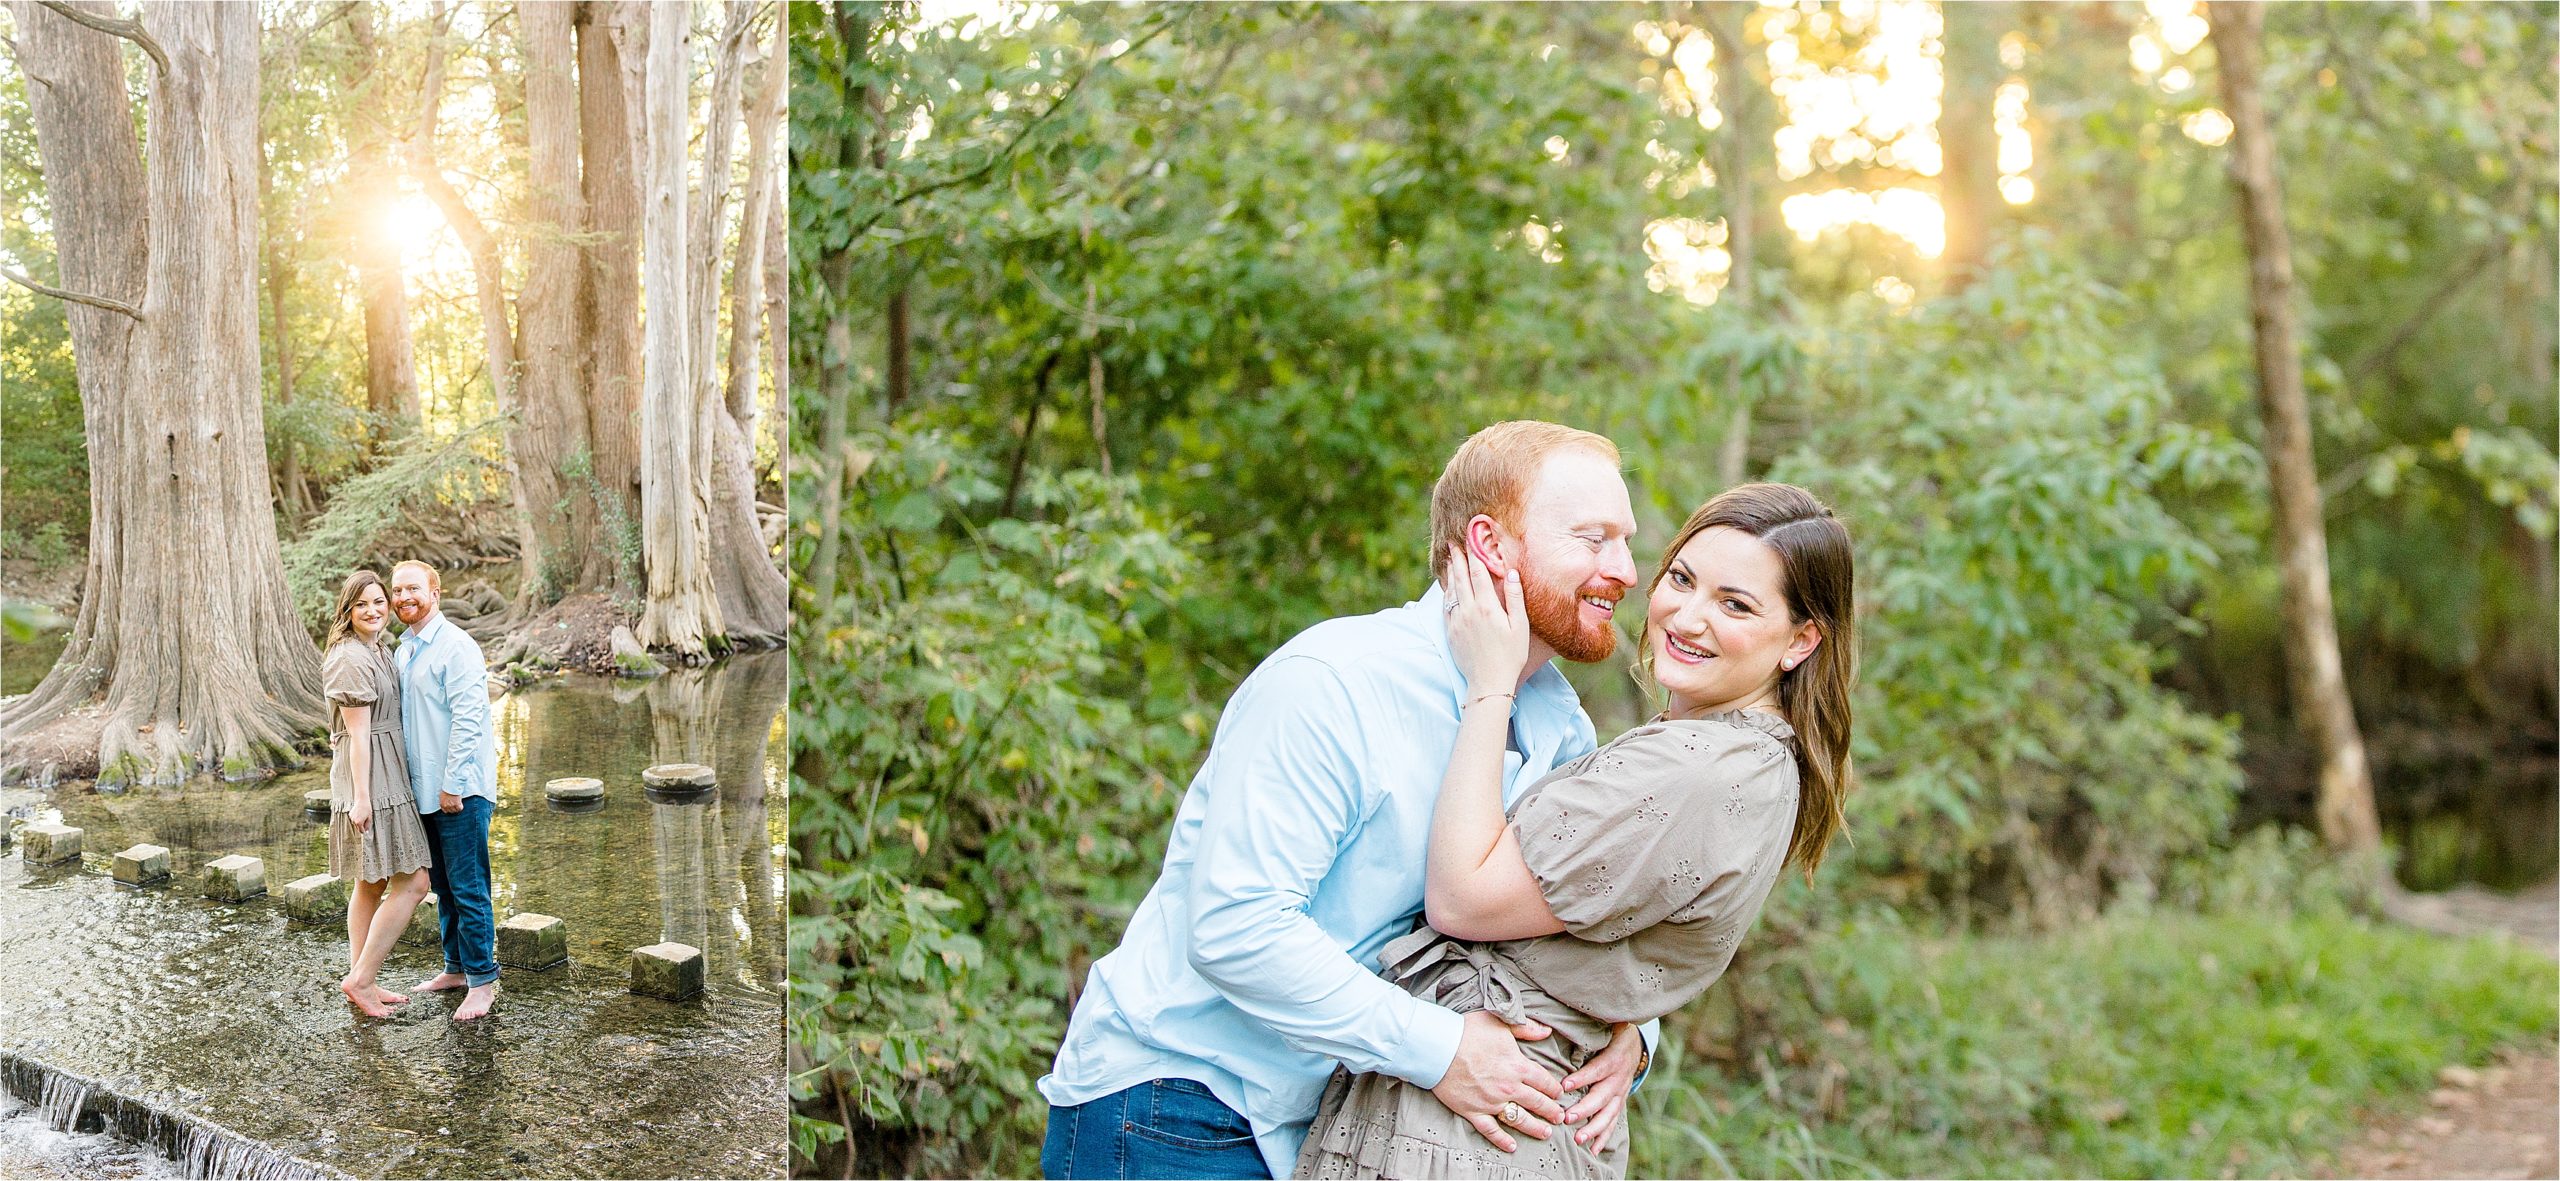 A couple poses in cibolo creek with their shoes off during their sunset hill country engagement session with Jillian Hogan Photography 